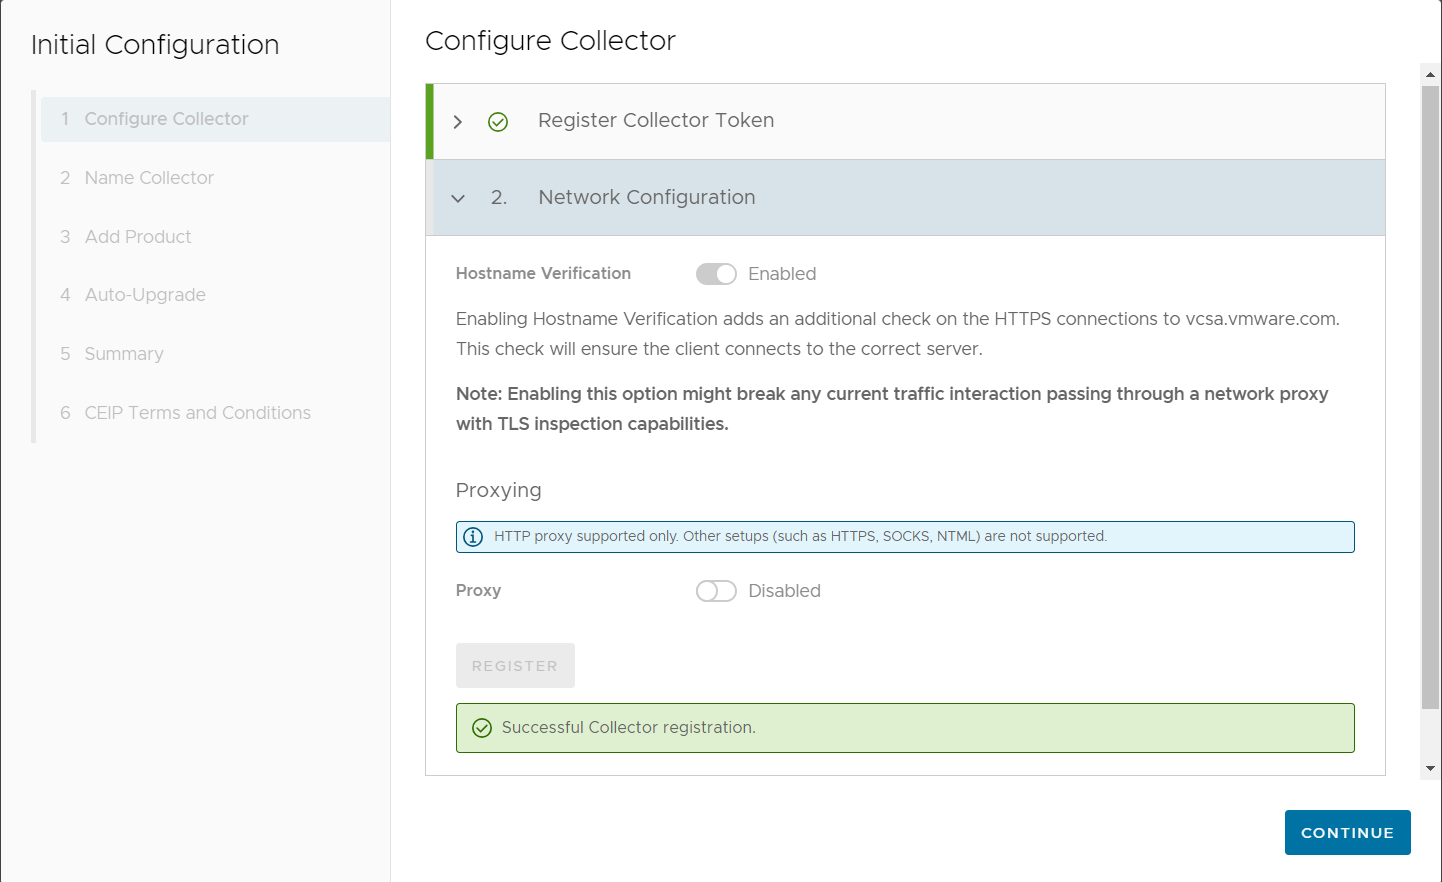 Configure Collector page is displayed with a message as 'Successful Collector registration'. Also, a Continue button is provided.